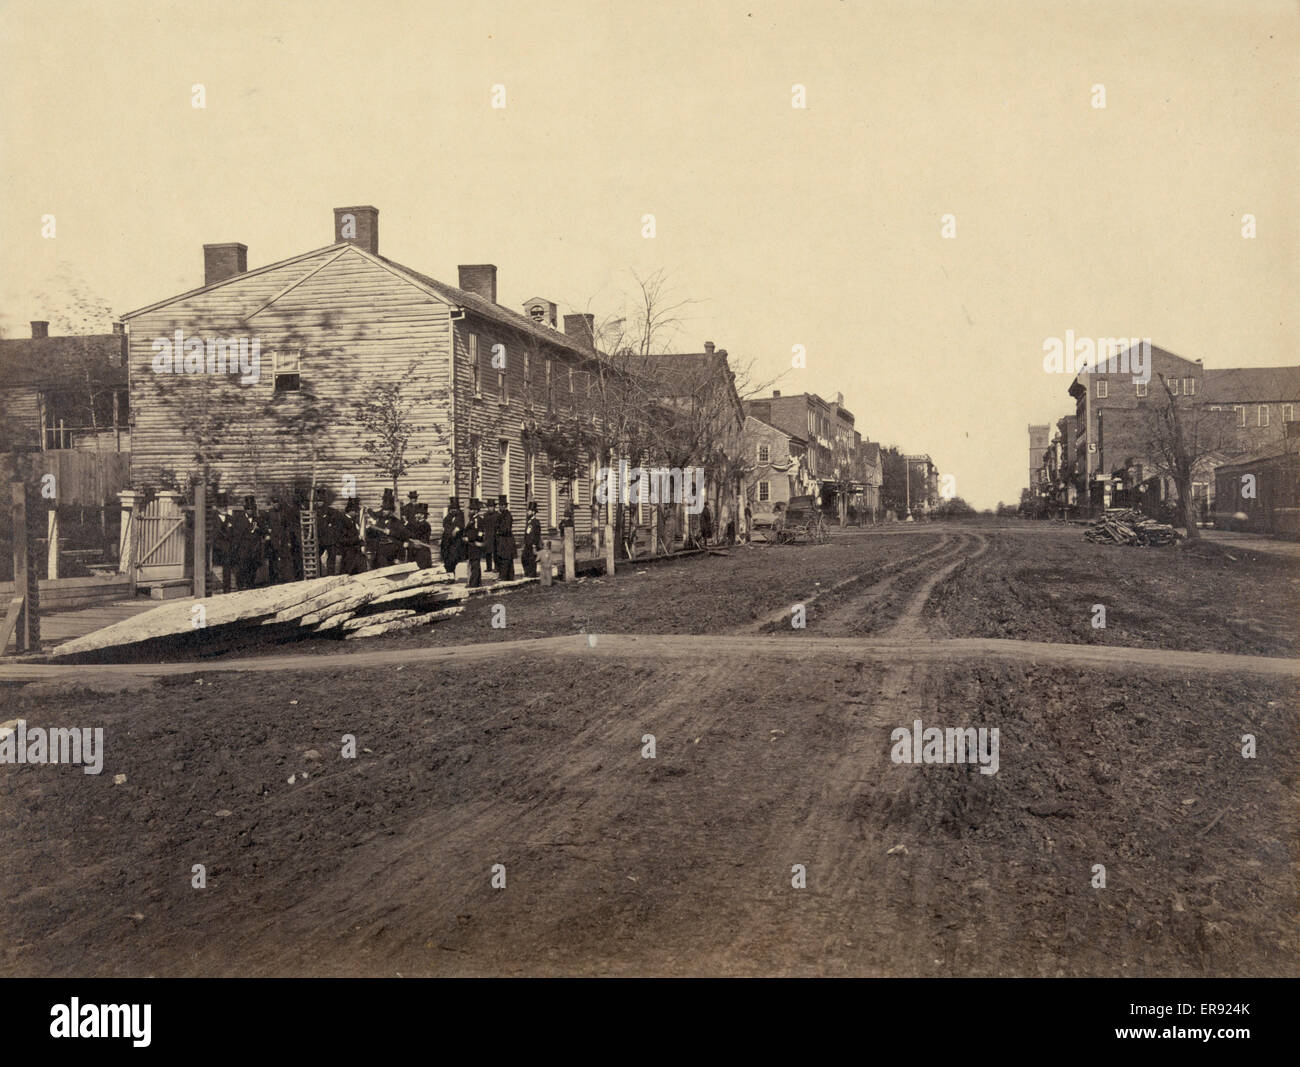 Former residence of President Lincoln, birthplace of Robt. Lincoln. Photograph shows men wearing suits and top hats standing on the side of the road at the end of a row of buildings at or near the site of the Globe Tavern in Springfield, Illinois. Date 18 Stock Photo